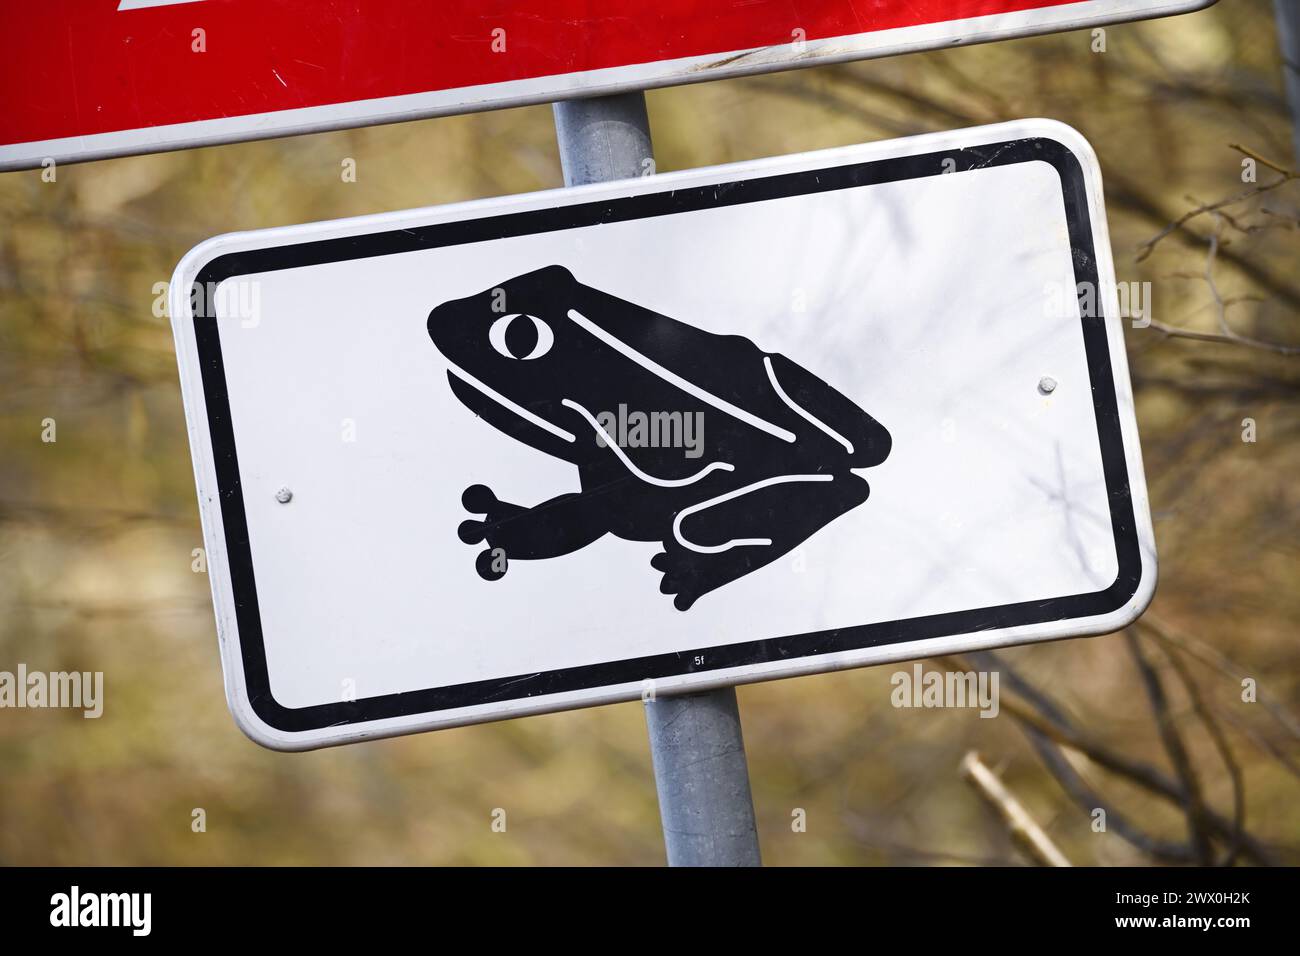 Warning Sign For Toad Migration In Scharbeutz, Schleswig-Holstein, Germany Stock Photo